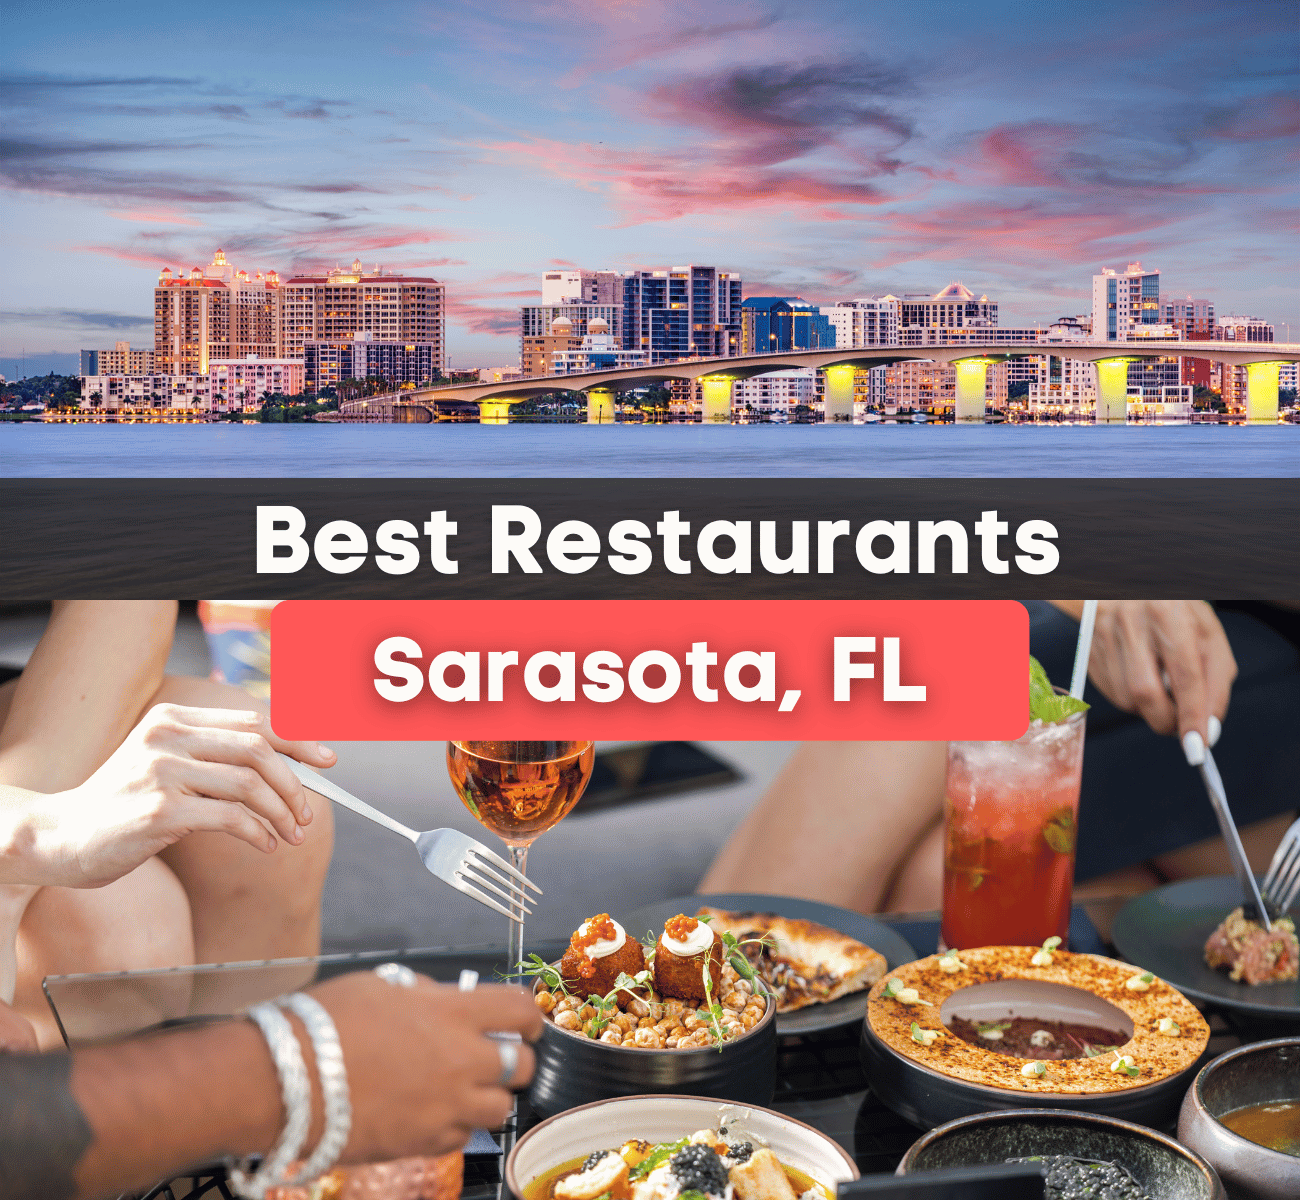 best restaurants in Sarasota, FL graphic with palm trees and people eating food